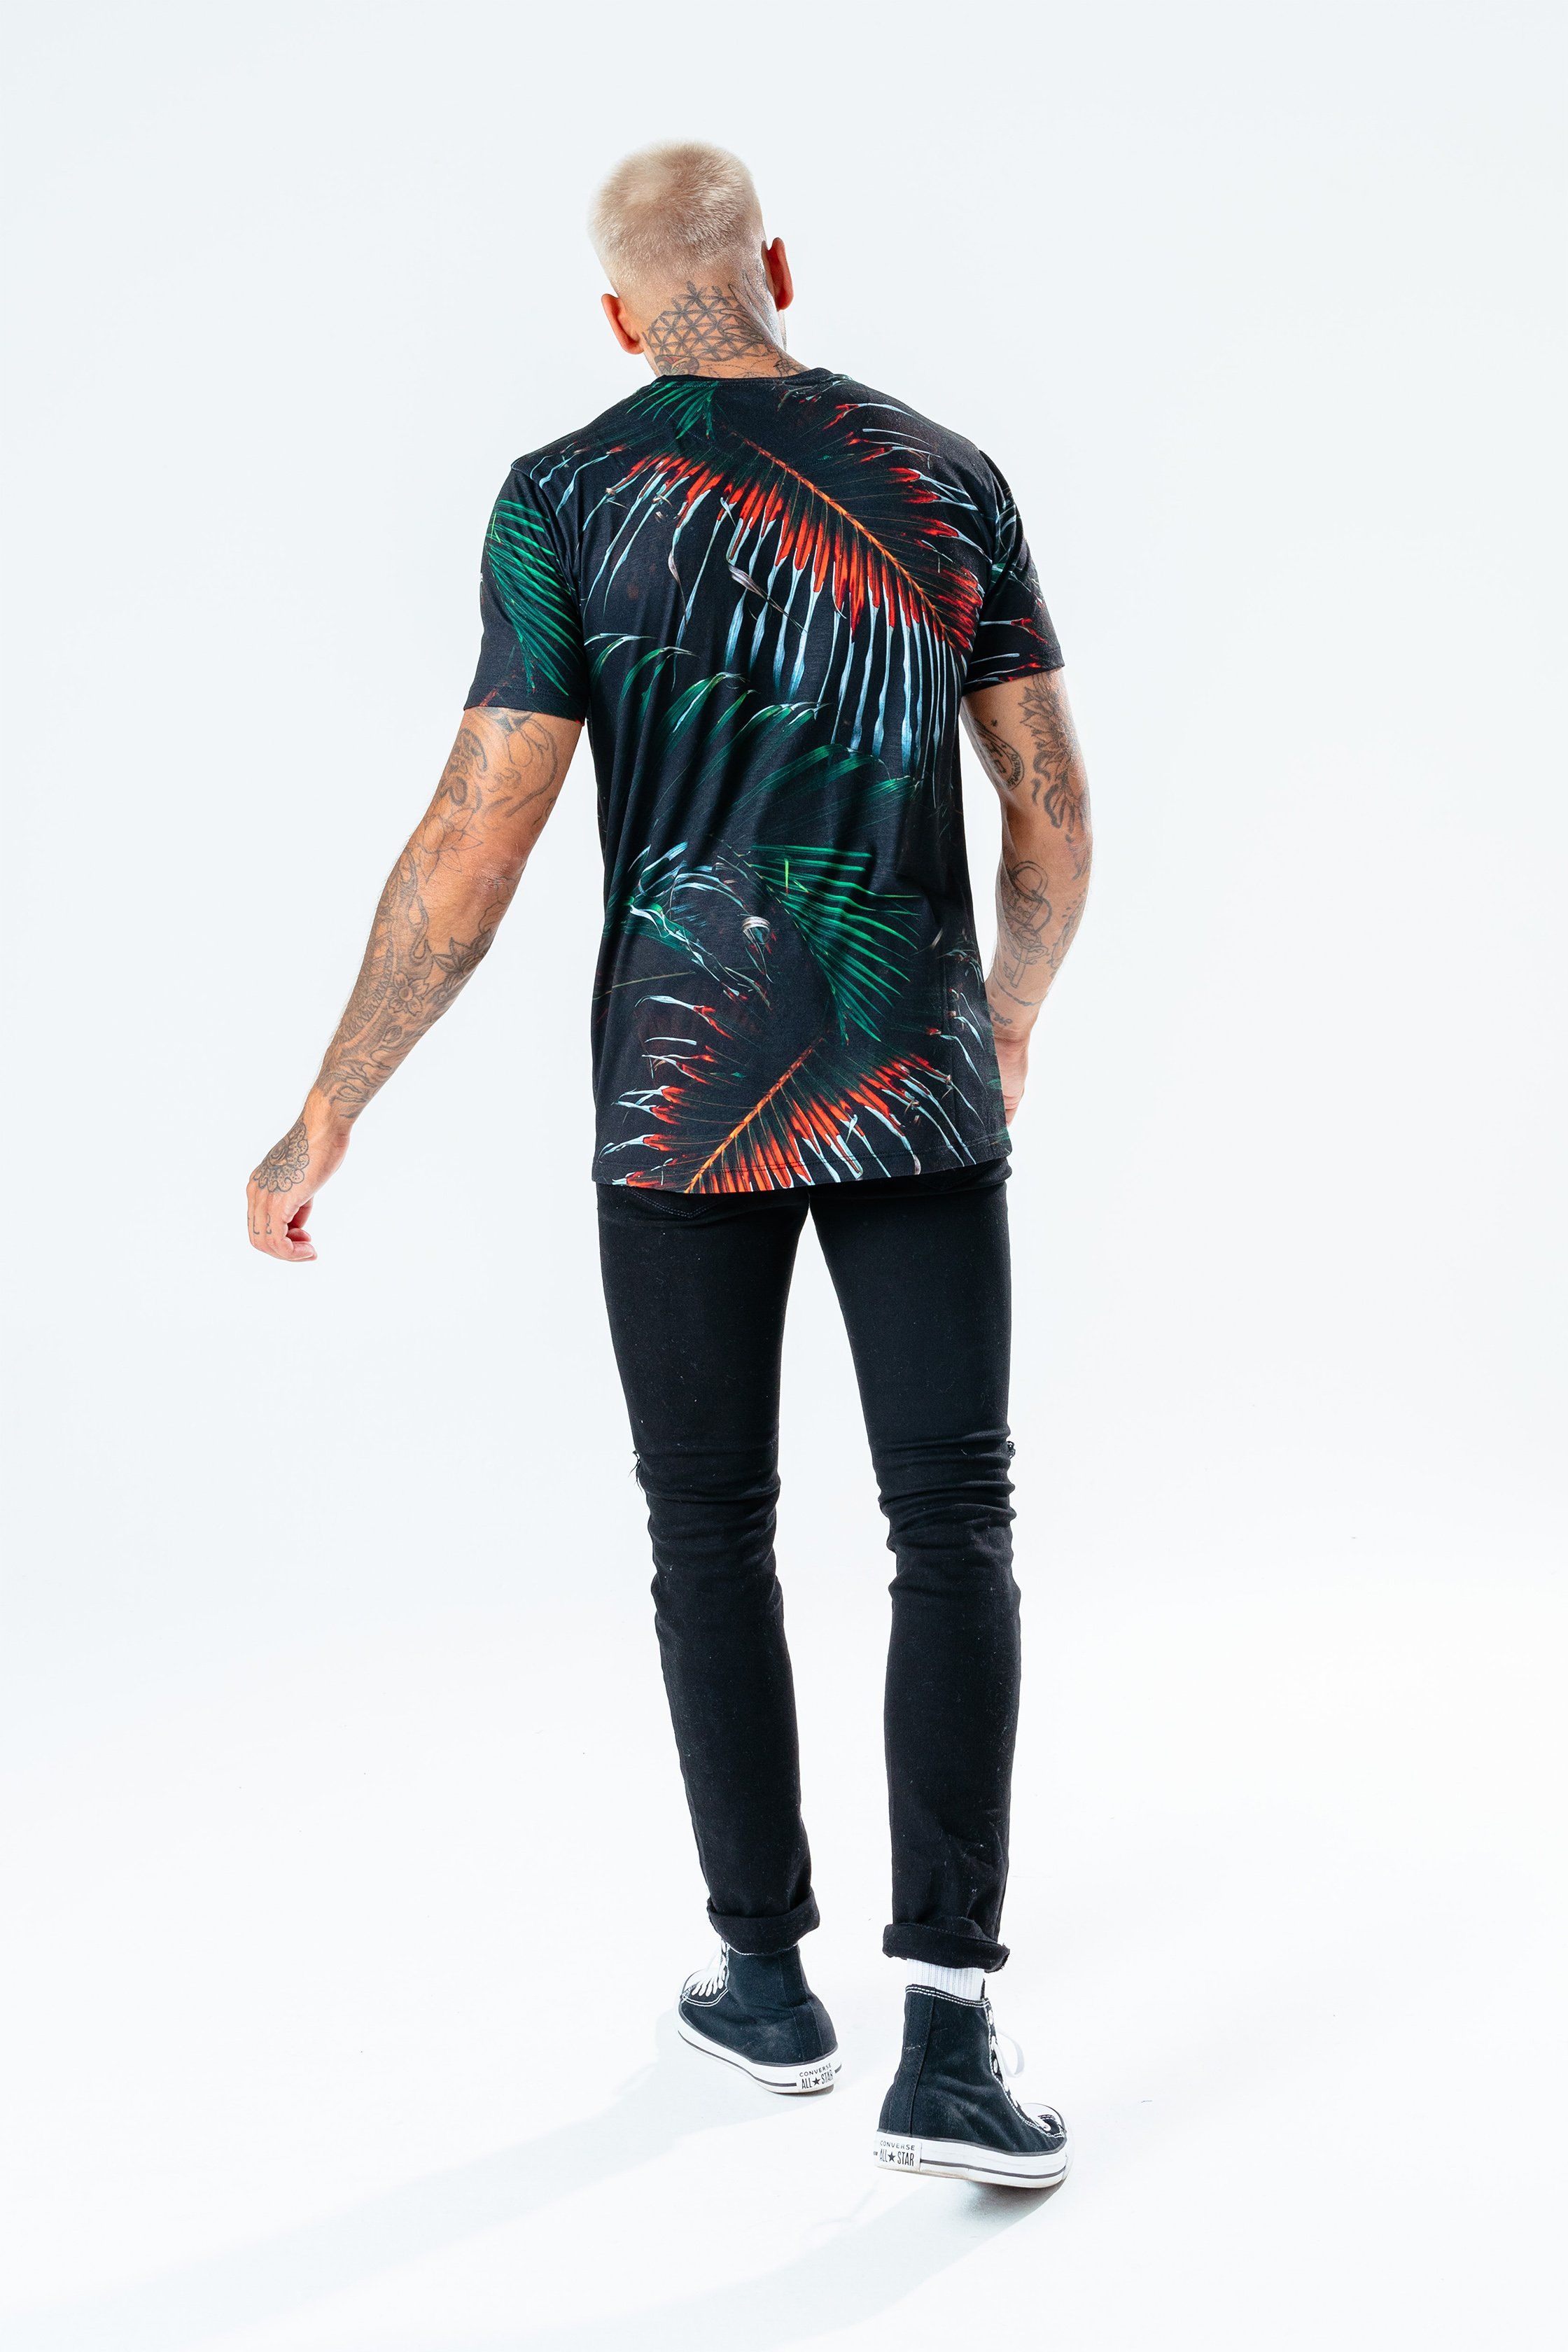 The HYPE. dead palm men's t-shirt pairs perfectly with the HYPE. black men's joggers for a relaxed fit. Coming in with a black, red and green colour palette in an 5% cotton and 95% polyester fabric base for supreme comfort. Designed in our standard men's tee shape, with a crew neckline and short sleeves in an all-over palm tree leaves inspired design. Finished with an embossed woven hem tab. Machine wash at 30 degrees.